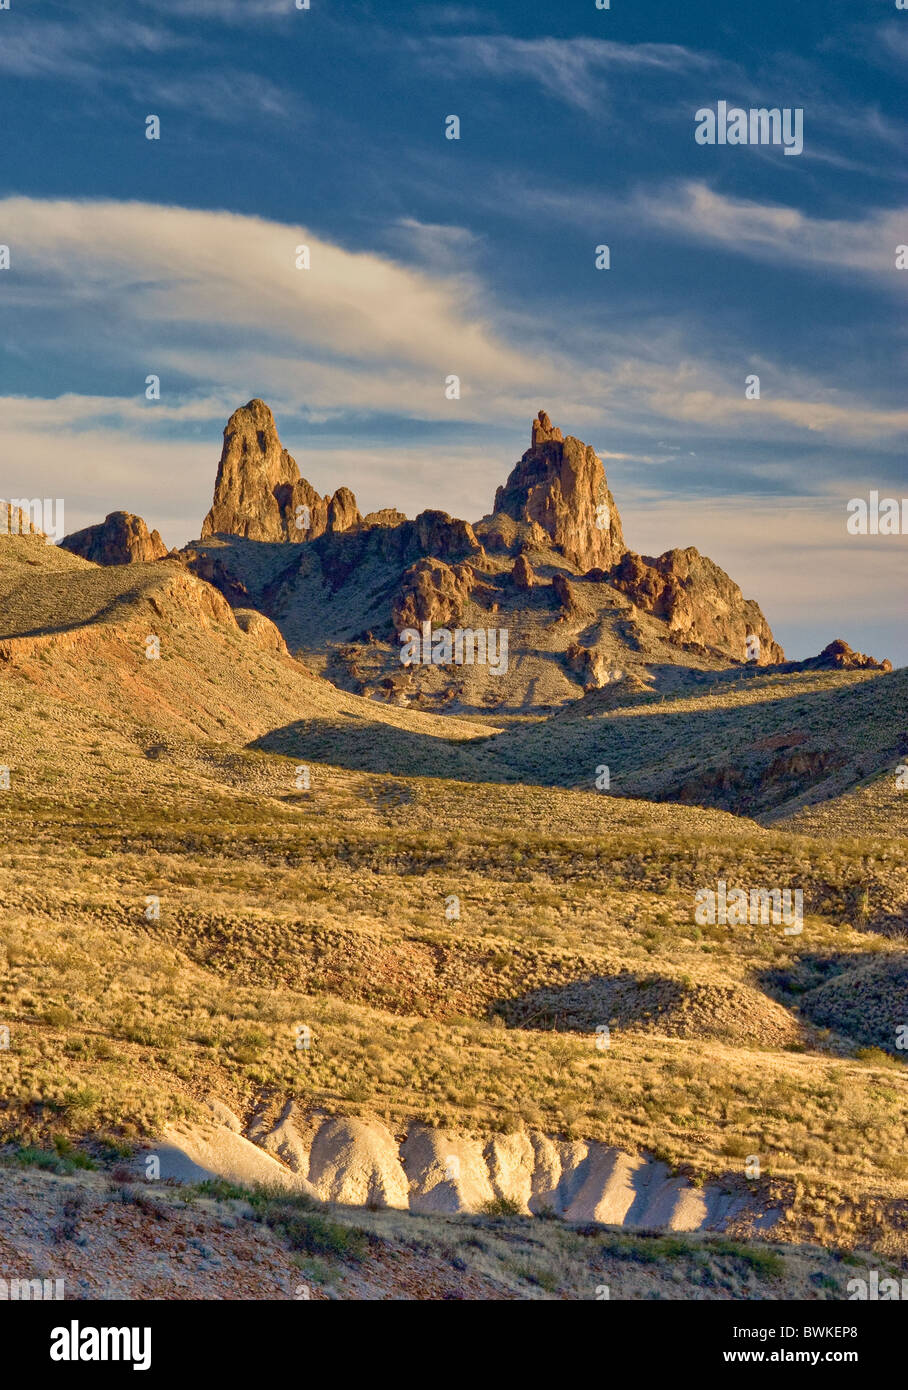 Mule Ears Peaks at sunset, Chihuahuan Desert in Big Bend National Park, Texas, USA Stock Photo